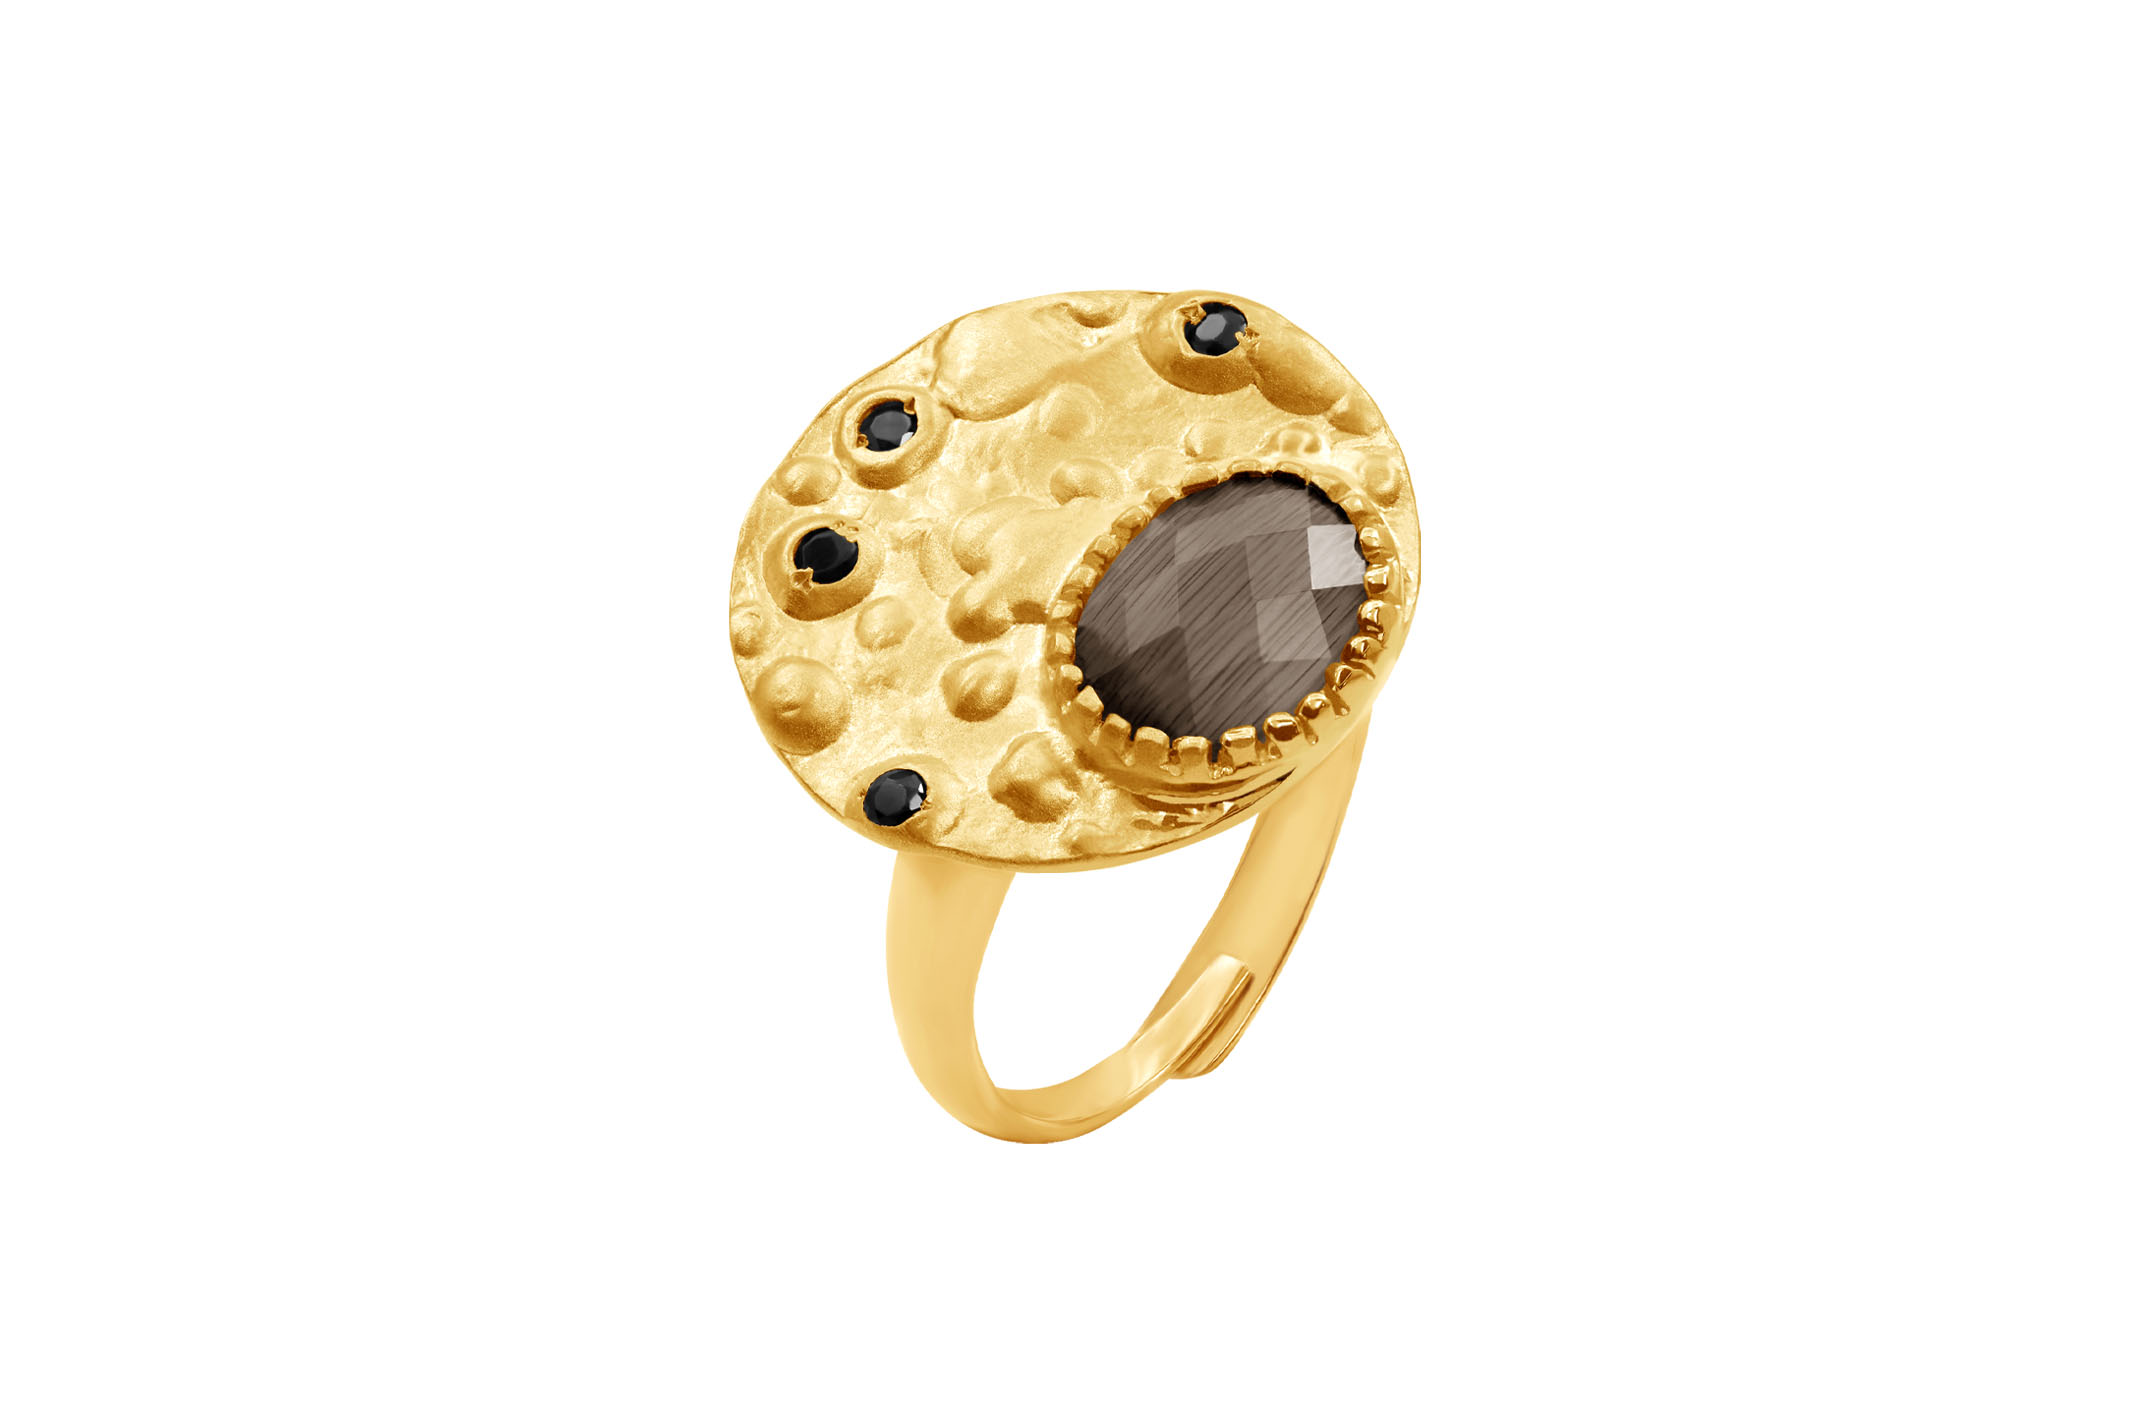 Jewel: ring;Material: 925 silver;Weight: 4.3 gr;Stones: zirconia;Color: yellow;Size: adjustable;Gender: woman